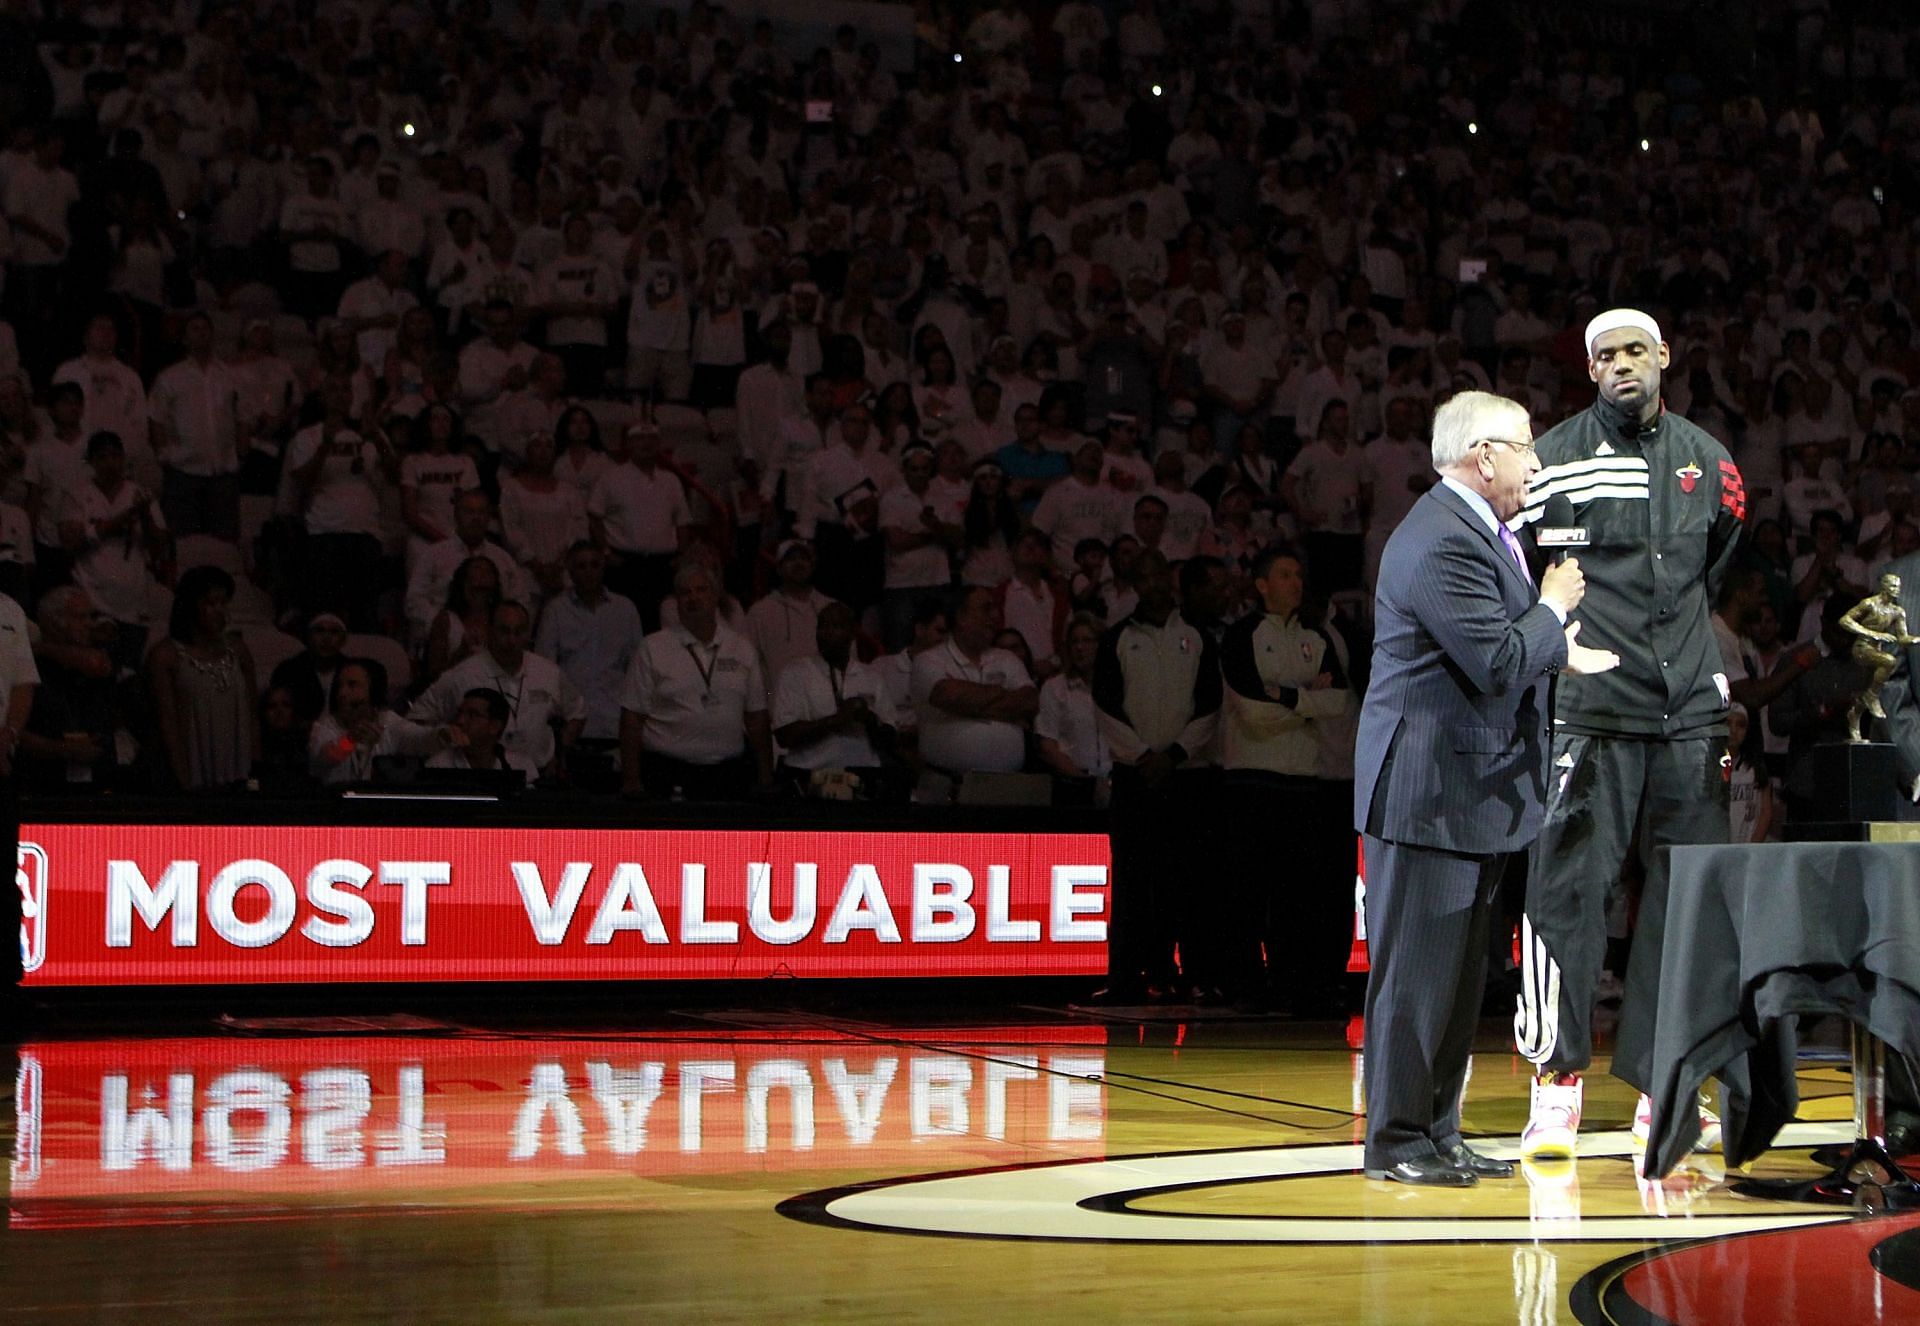 David Stern went on to award LeBron James his MVP trophy during his time with the Miami Heat.